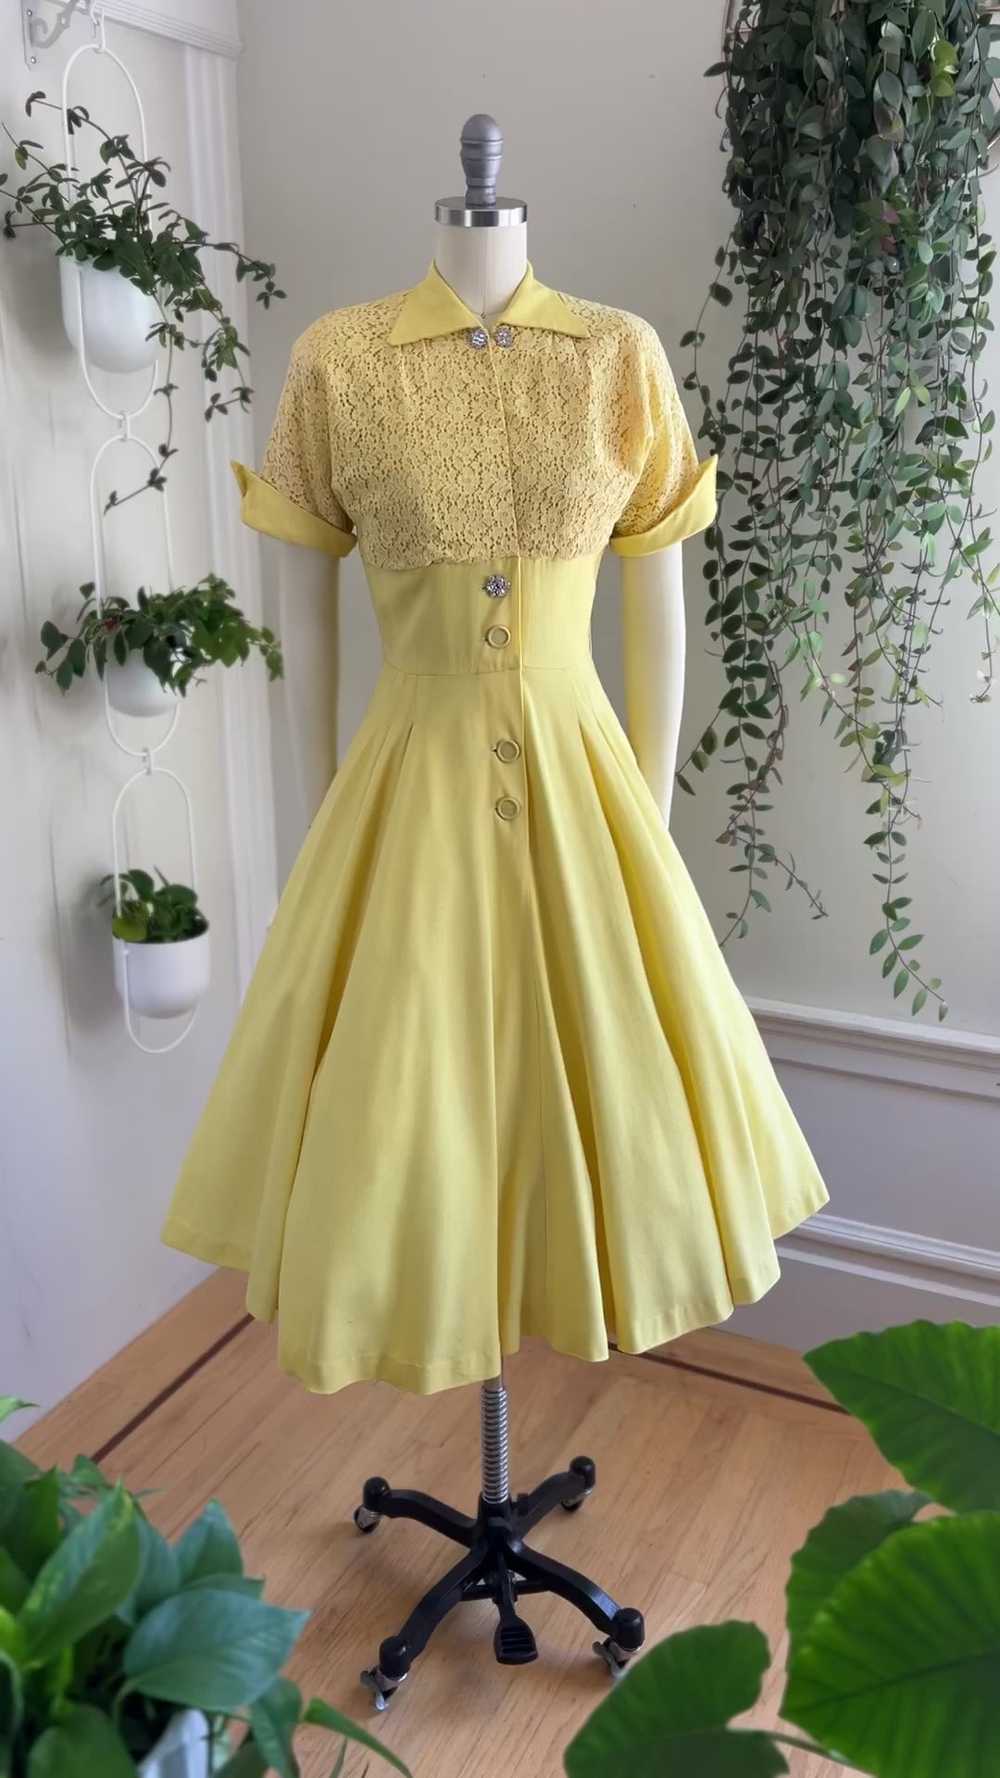 1950s Linen & Lace Dress | x-small/small - image 3